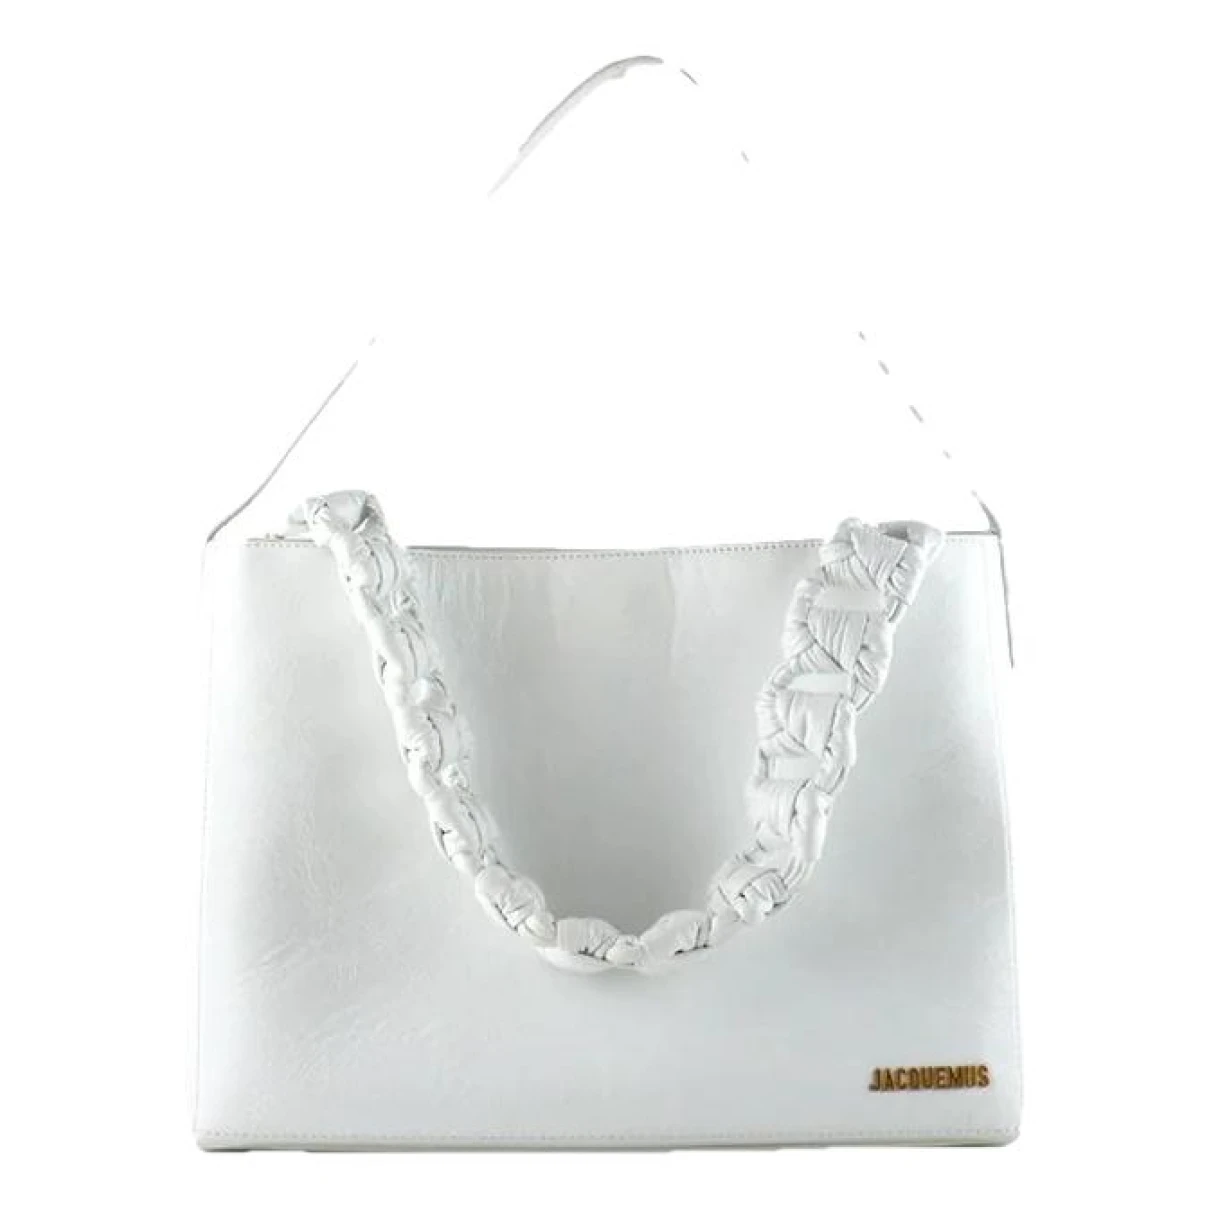 Pre-owned Jacquemus Le Sac Noeud Leather Tote In White